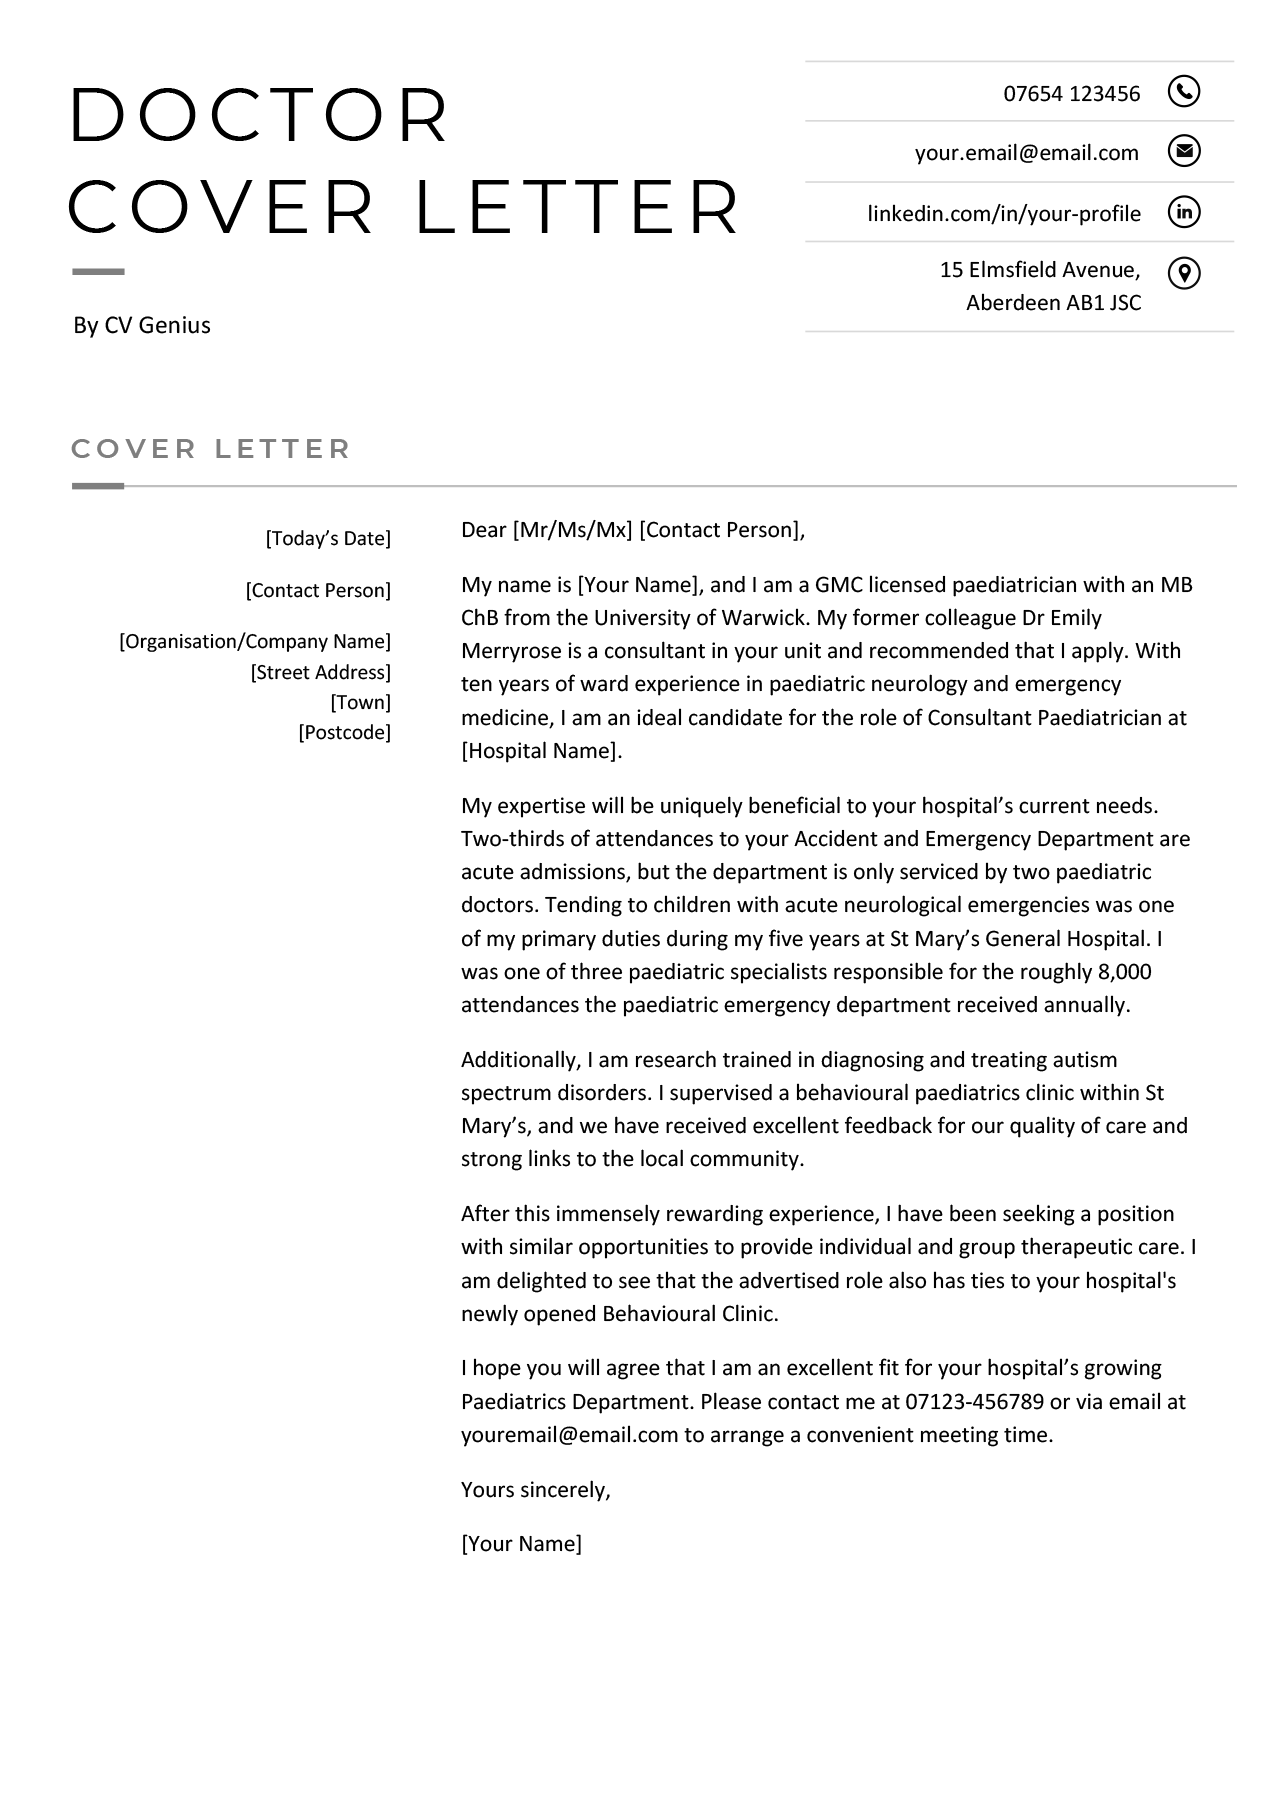 A doctor cover letter with black header and five paragraphs describing the job applicant's skills and job experience.